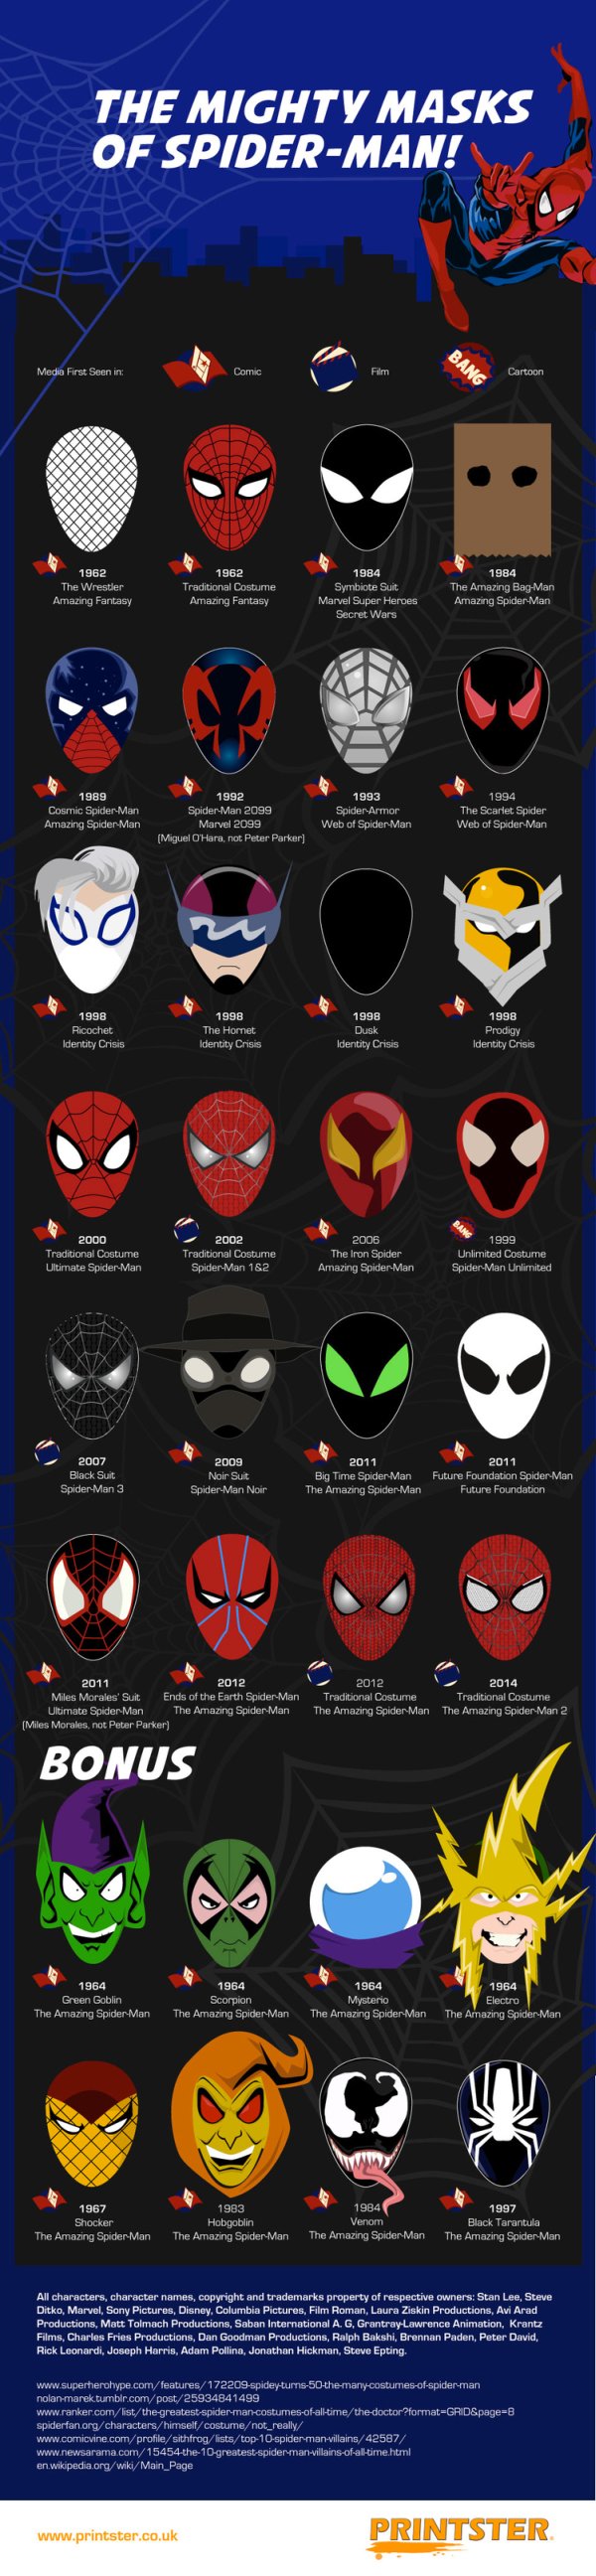 The Mighty Masks of Spider-Man Infographic